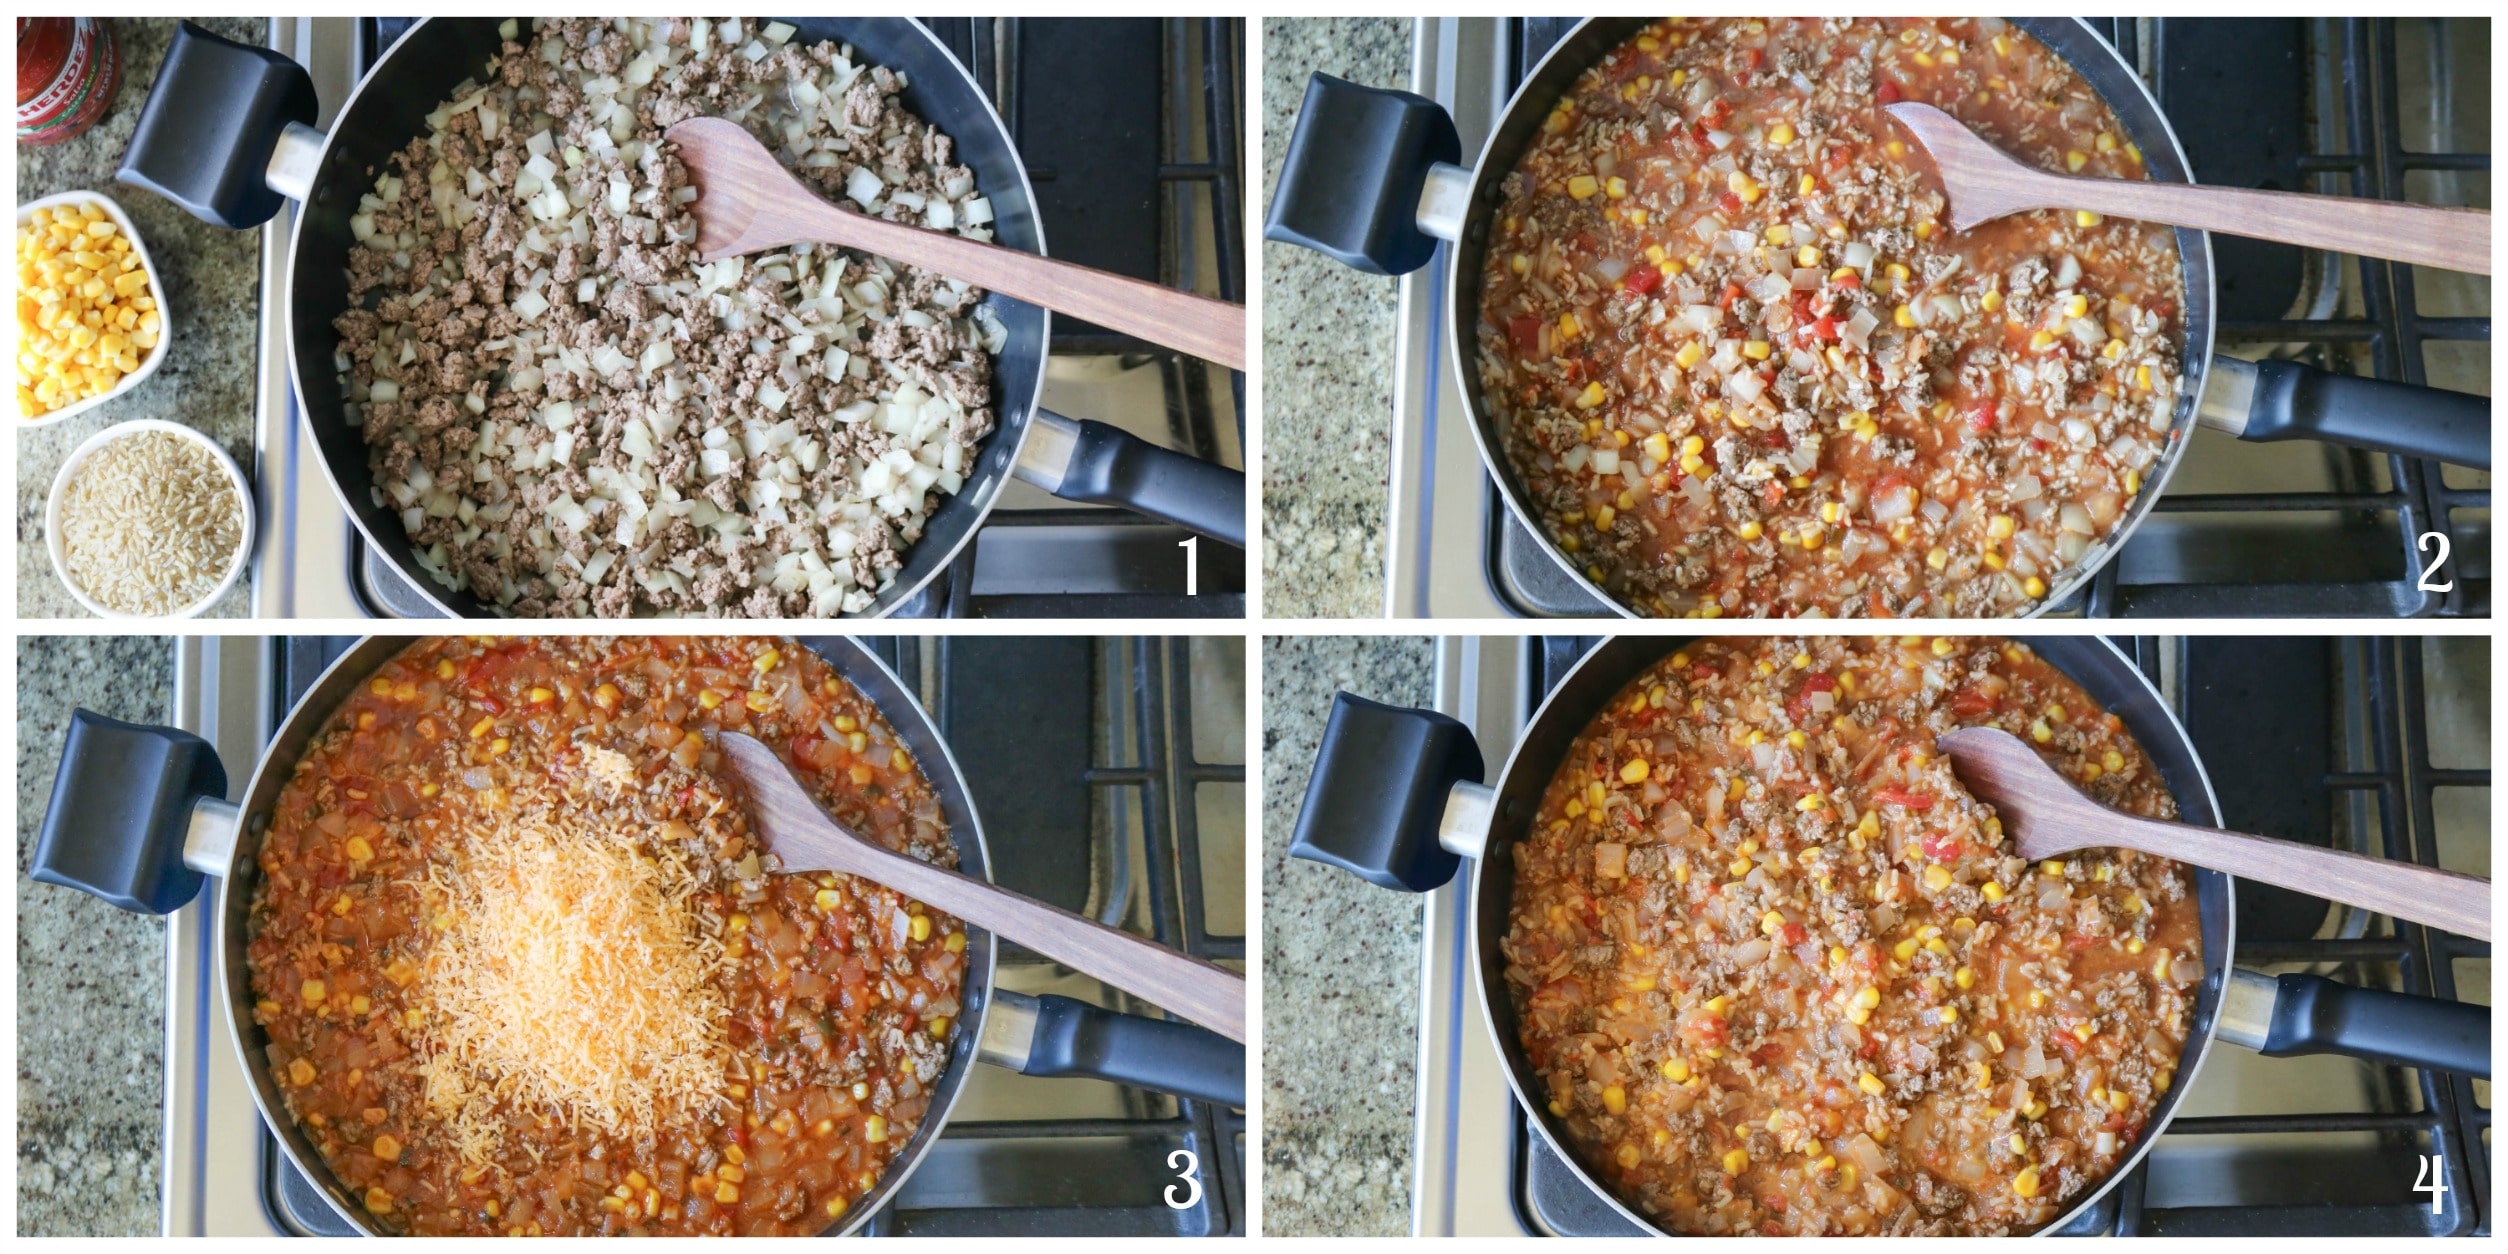 Collage of 4 photos showing steps in cooking this Mexican beef and rice dinner.